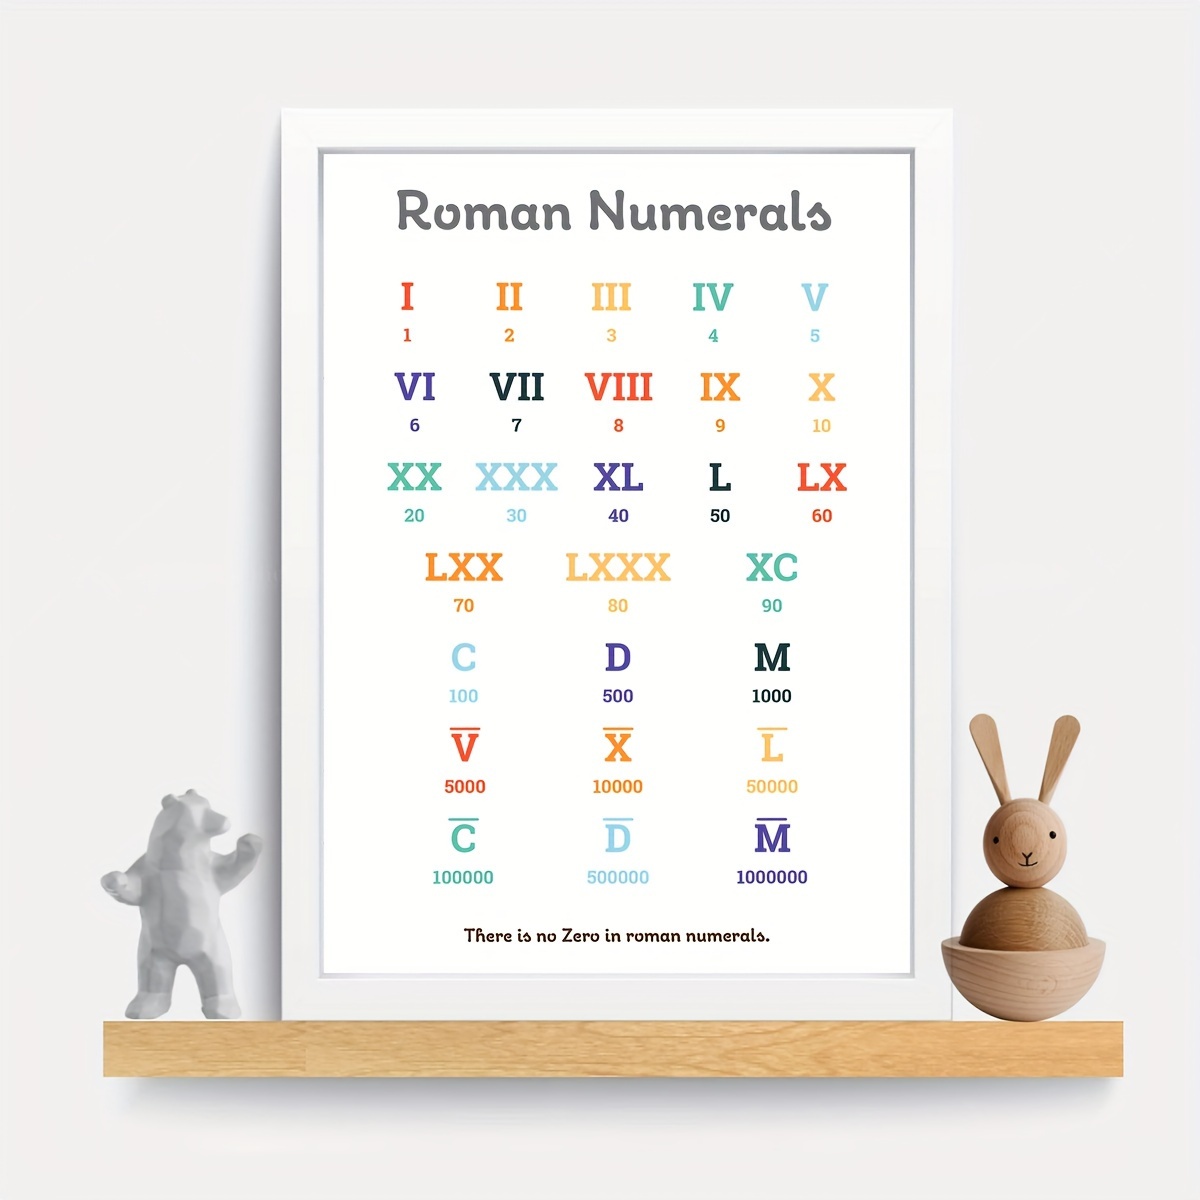 Roman Numerals - Chart, Rules, Roman Counting